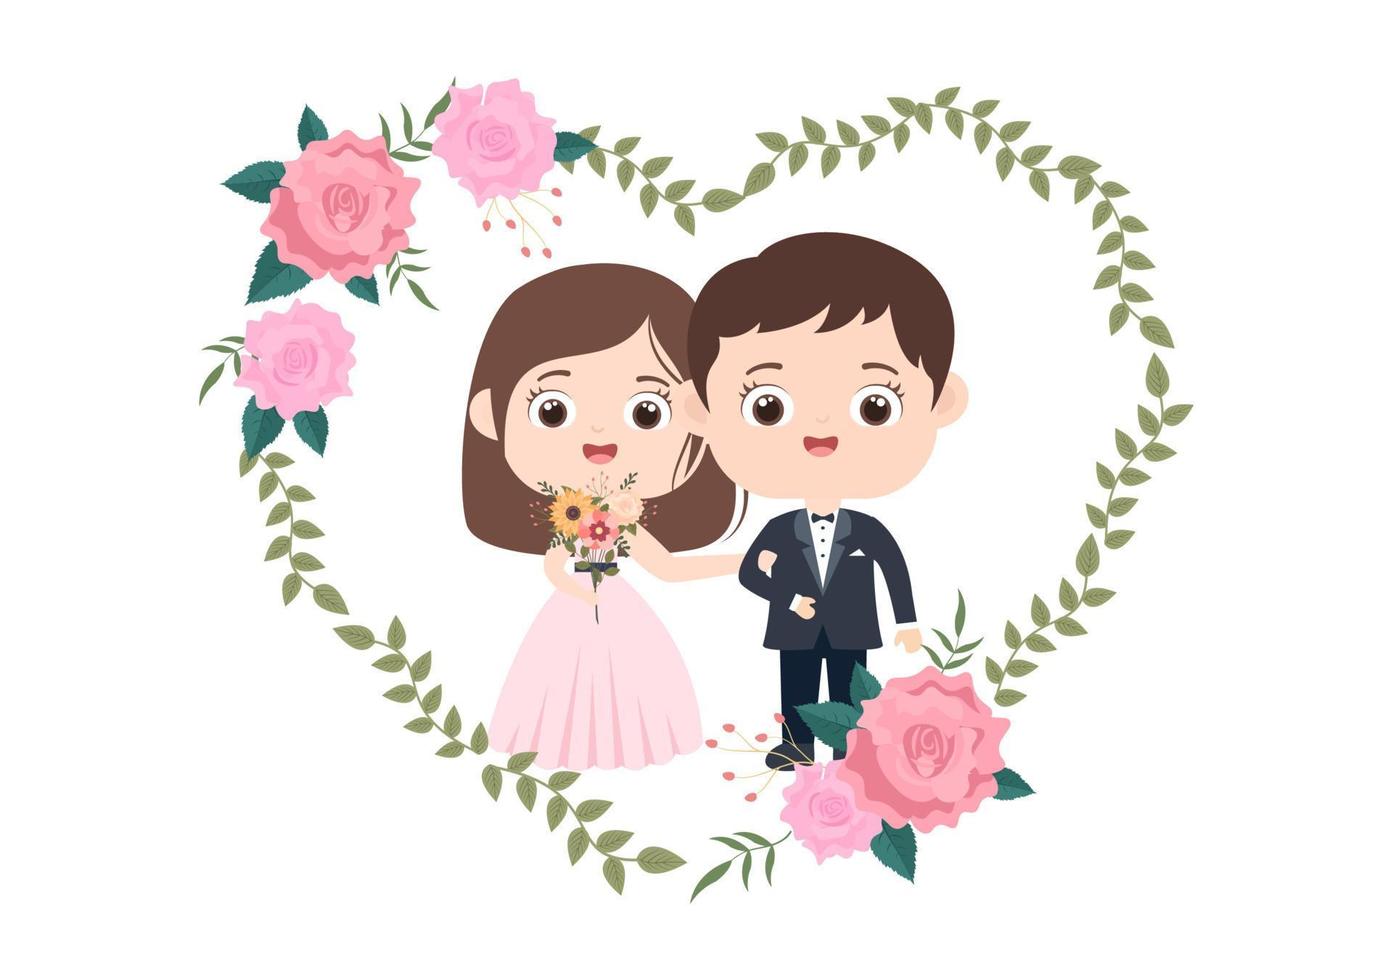 Happy Couple Celebrating Wedding or Married Ceremony with Beautiful Flower Decorations Outdoors Room in Flat Background Cartoon Style Illustration vector